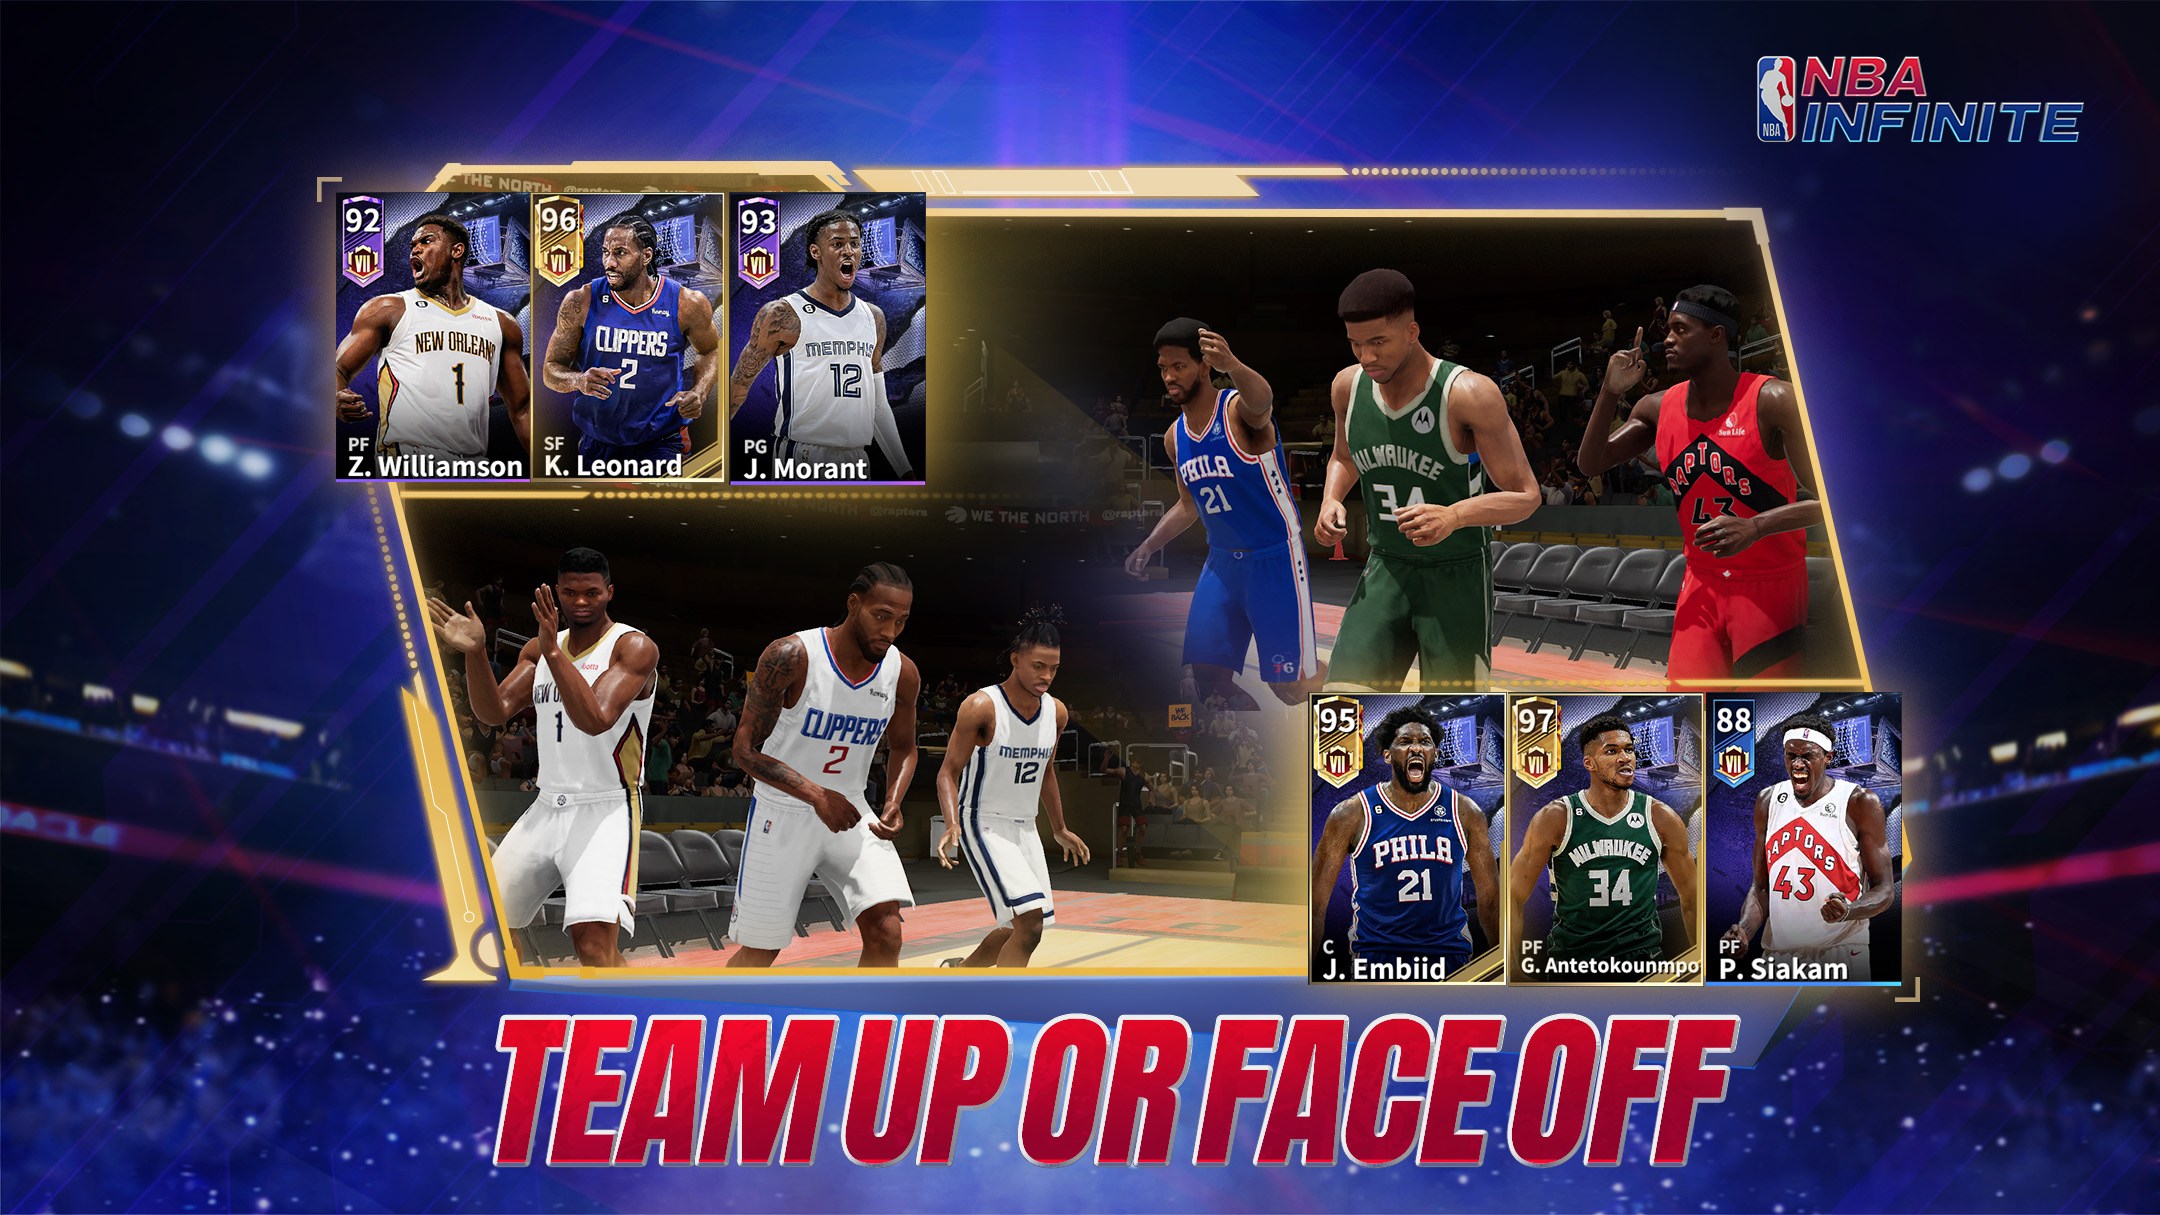 NBA Infinite on PC With BlueStacks - Take to the Court and Build Your Basketball Legacy